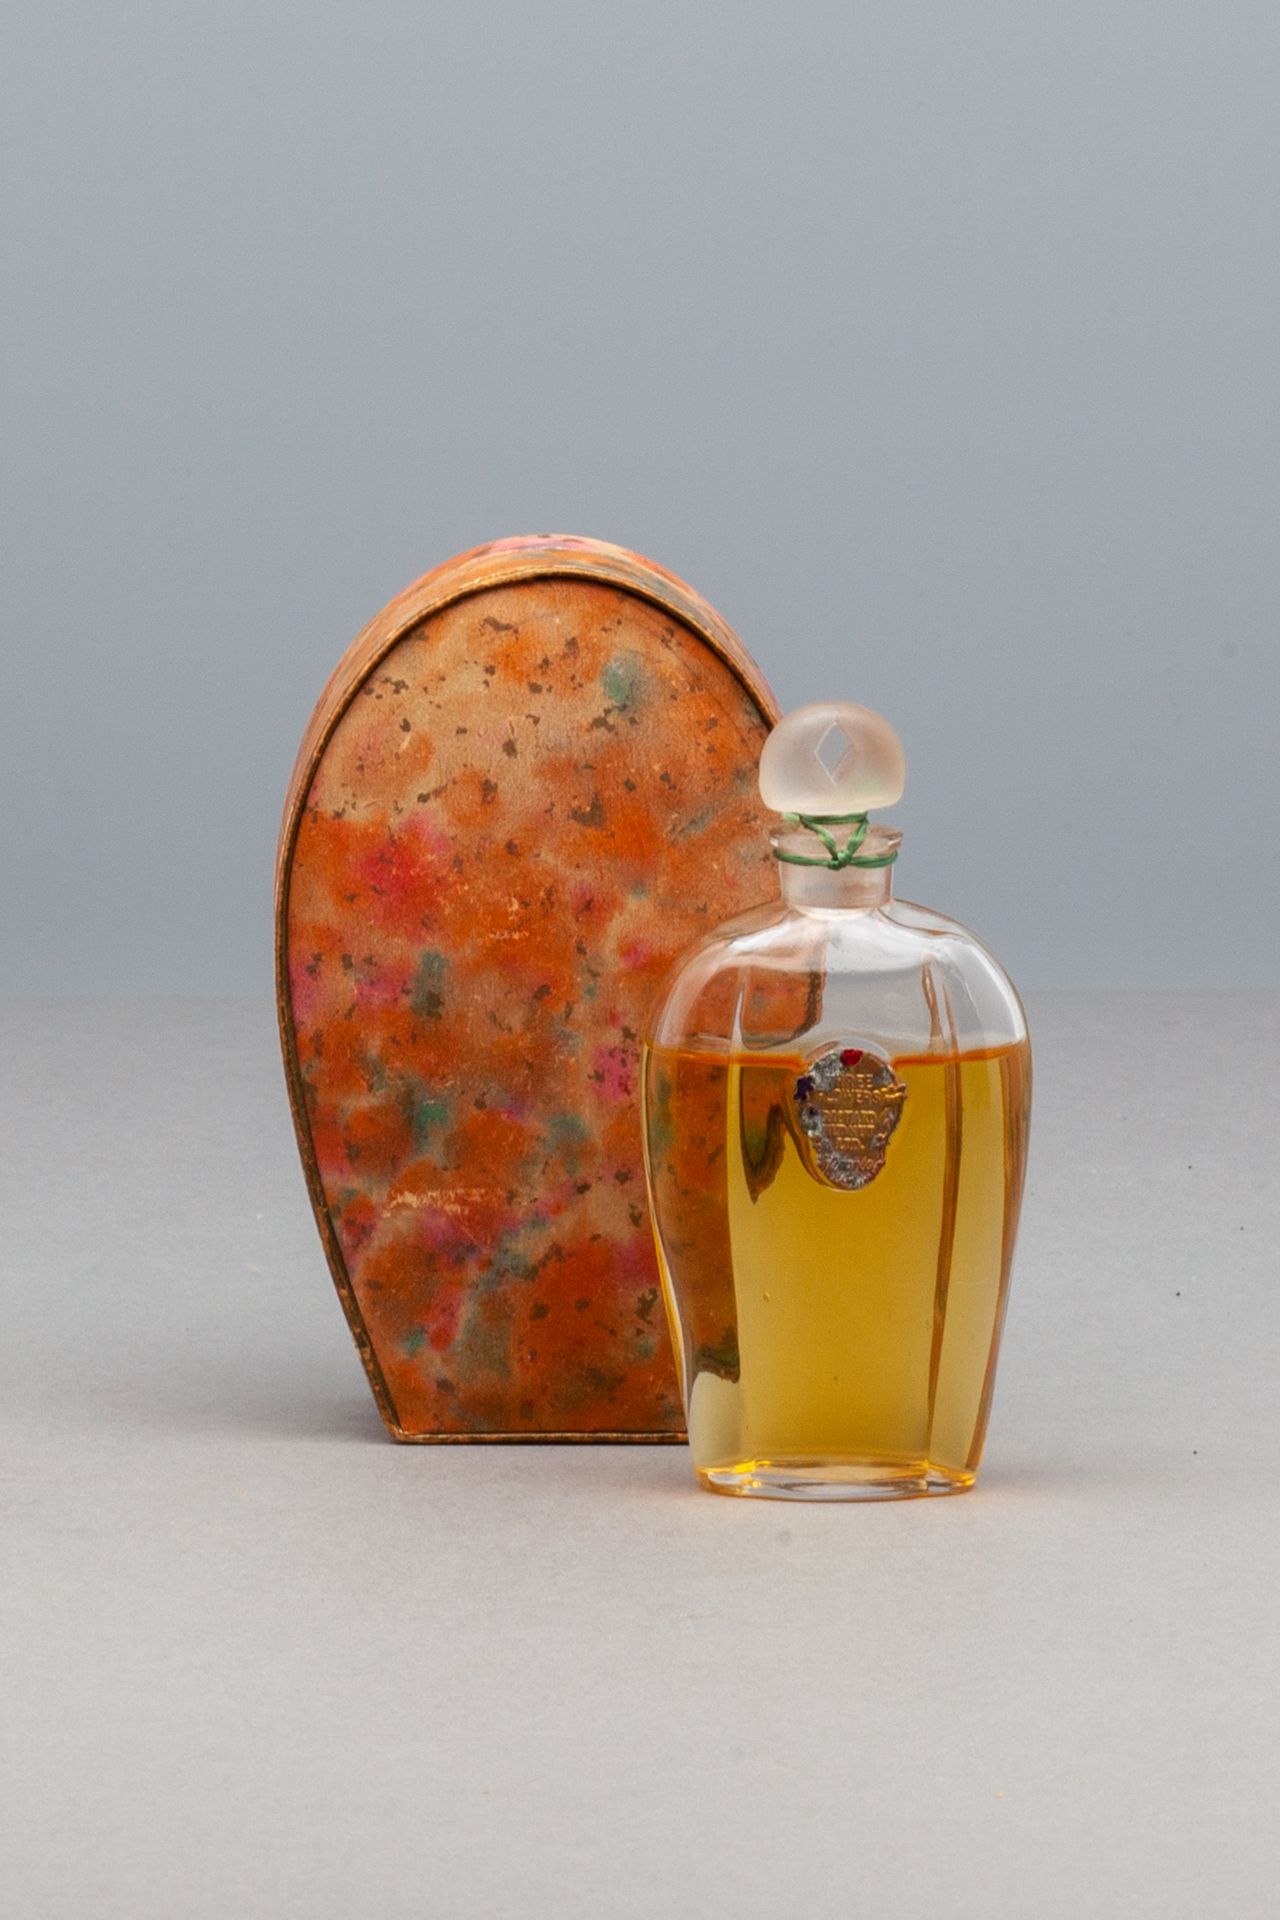 HUDNUT "THREE FLOWERS" Bottle of ovoid form decorated with its label. In its box&hellip;